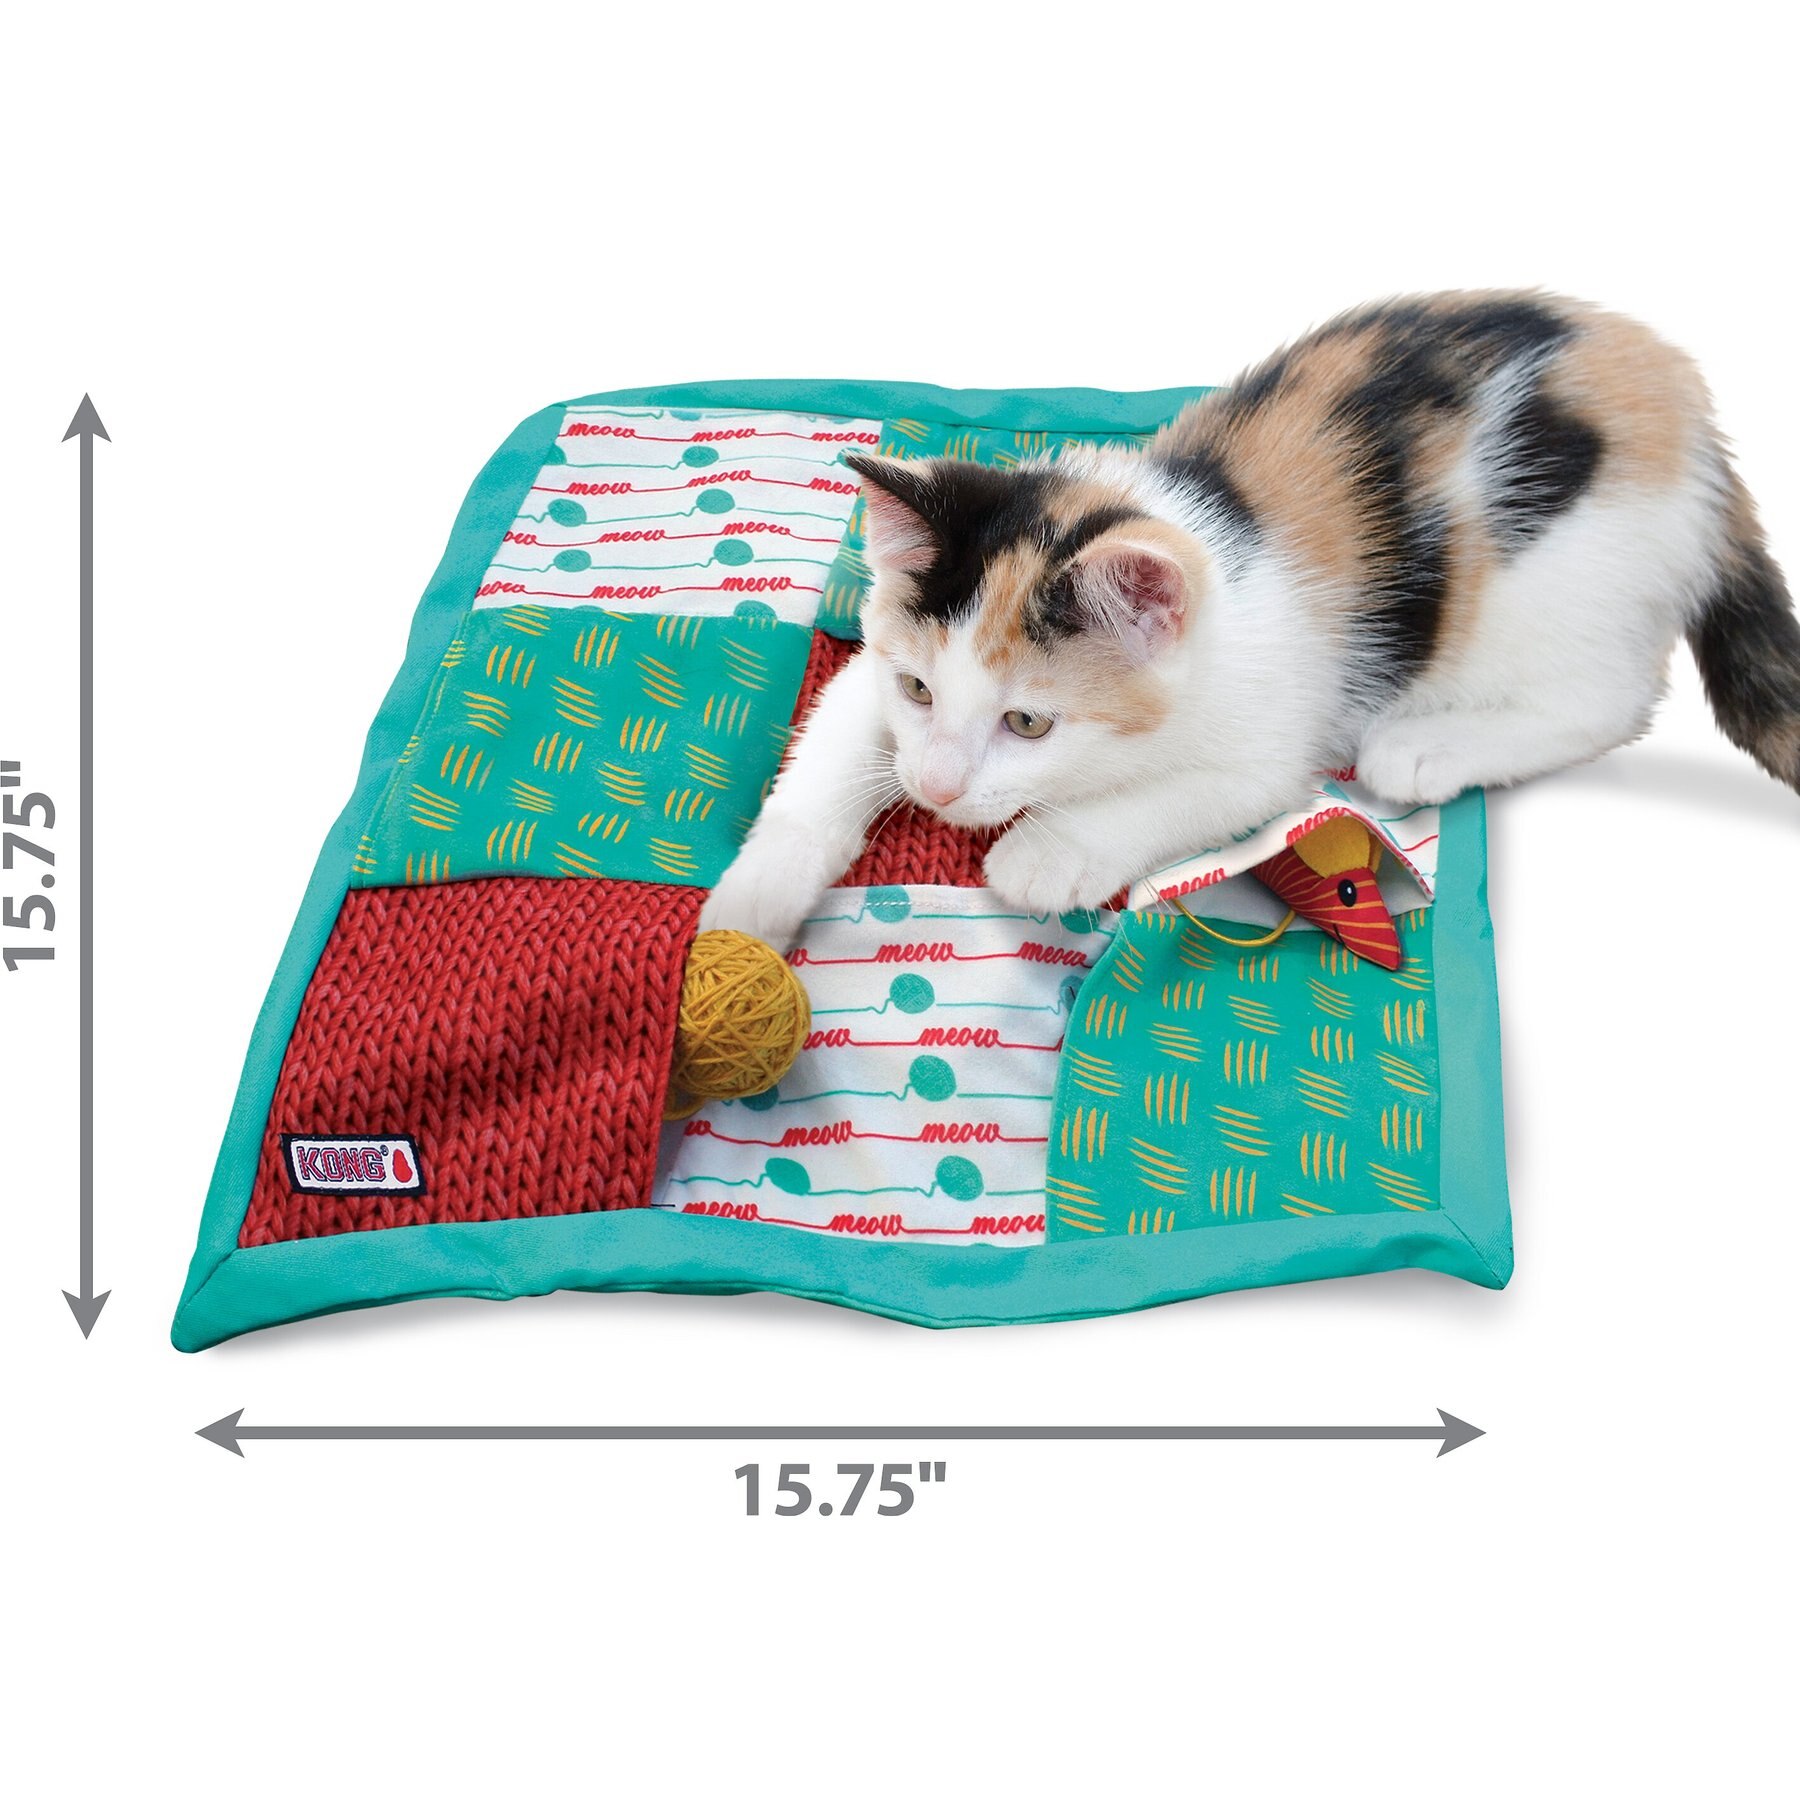 KONG Cat Catalogue, Quality Pet Products